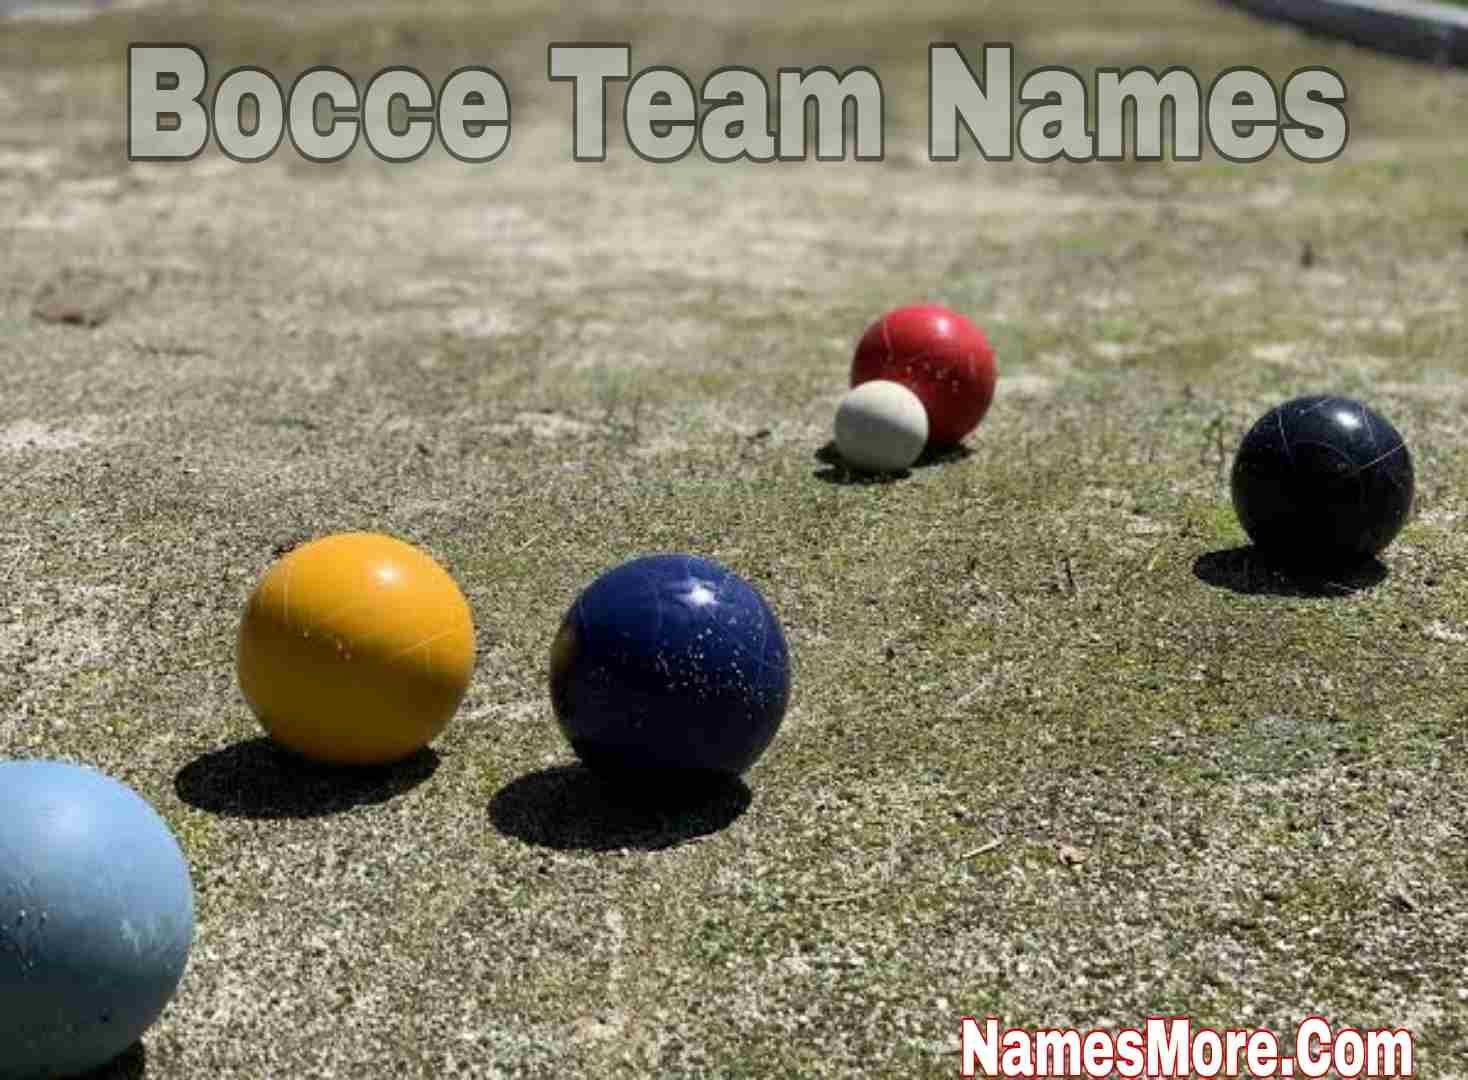 Featured Image for 990+ Bocce Team Names [Research Based Name]